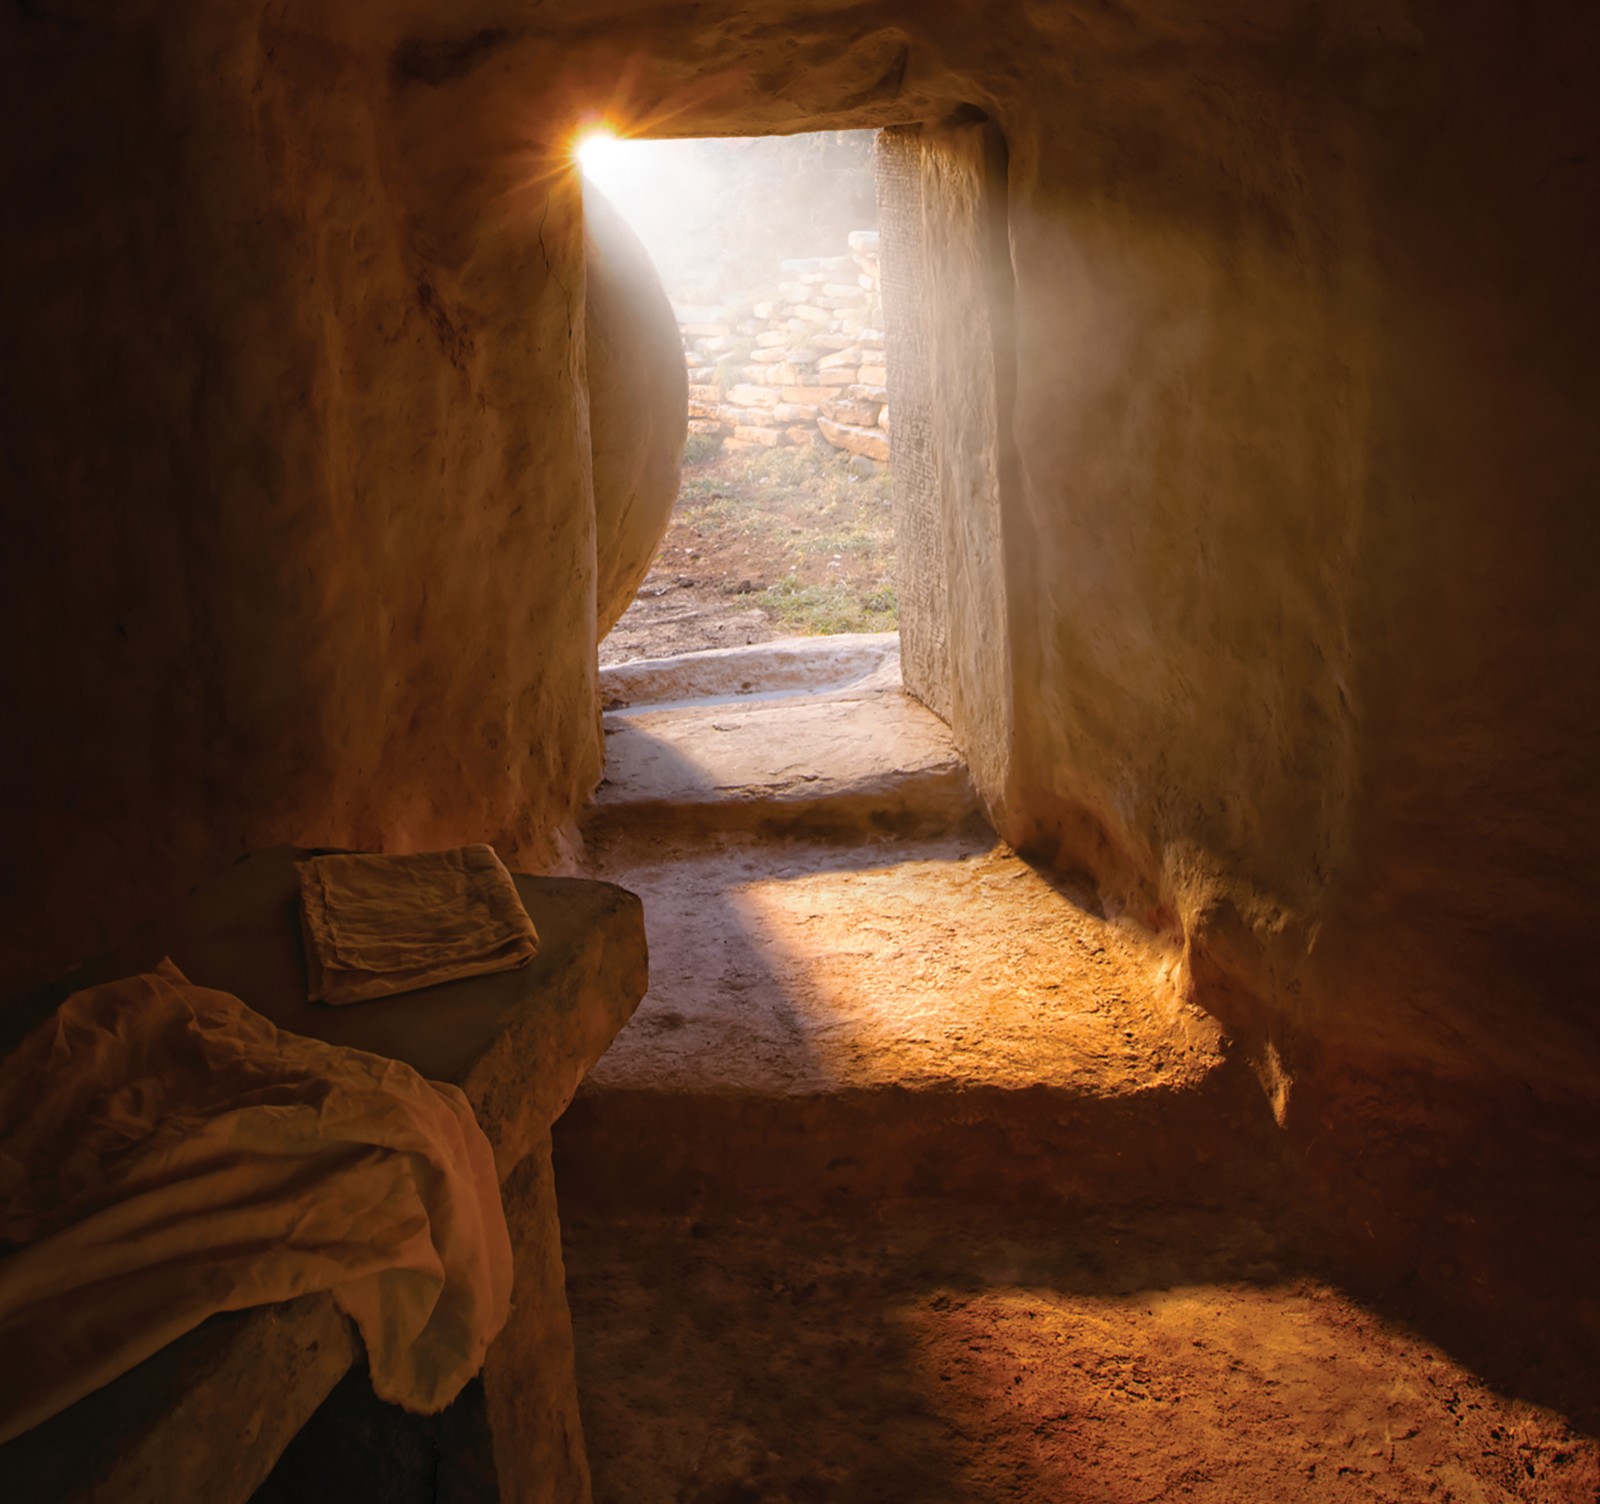 A tomb with stone steps leading to an empty burial bed and discarded wrappings. At the entrance the stone has been rolled away to reveal rays of sunlight and a partial view of outside the tomb.